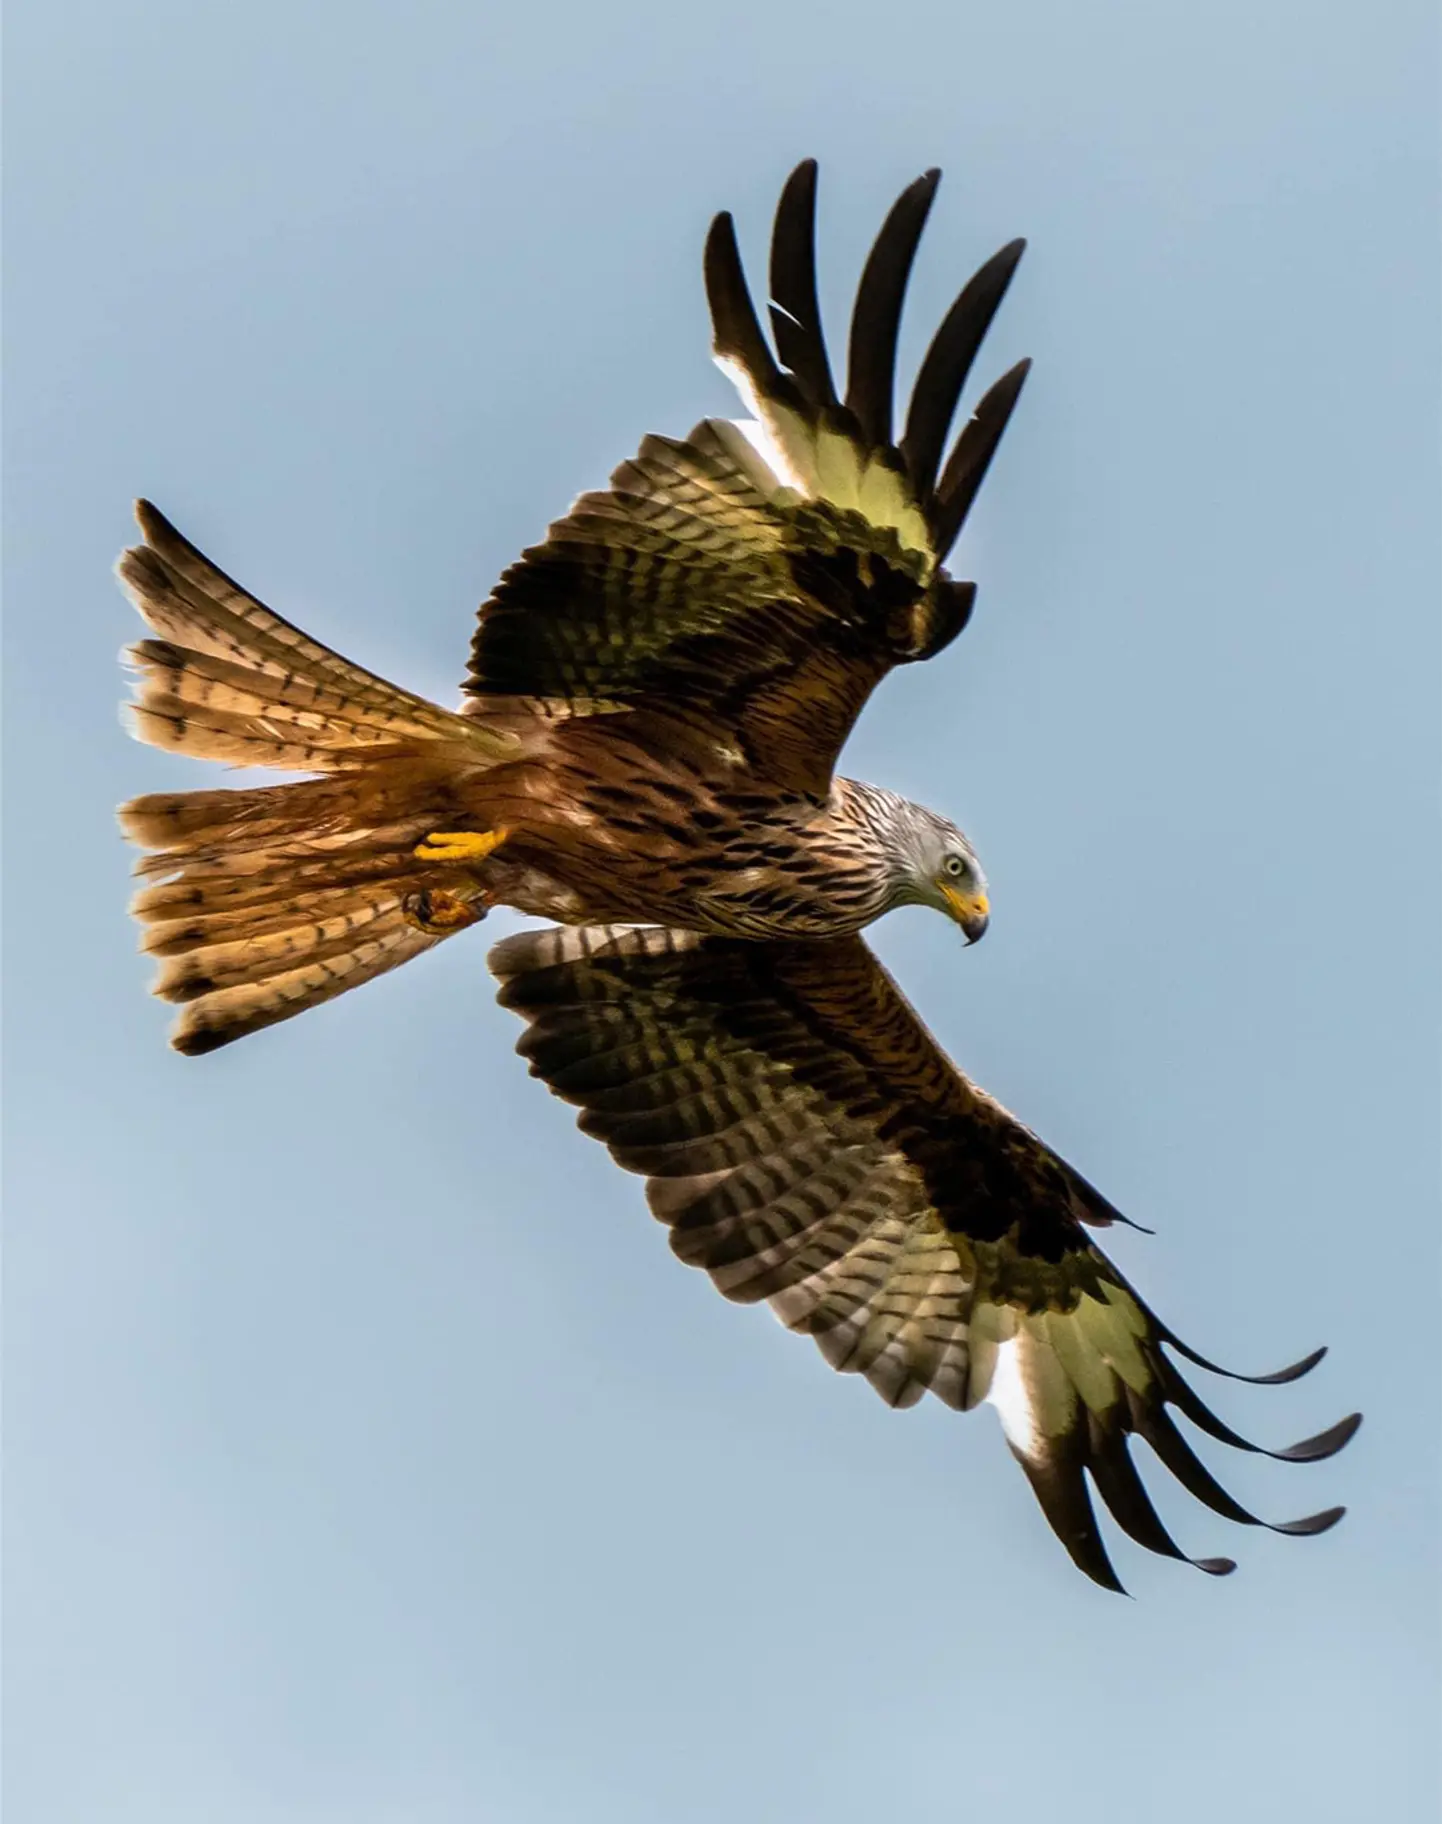 A pure blue -sky background  gives a clear outline of this large bird. Splayed feathers at the end of its wings that are in flight.  A hooked grey and yellow beak. Each wing has an intricate assortment of white and brown fanned out patterns. The sun is shining through the tailfeathers making them look a lighter colour than the wings.  